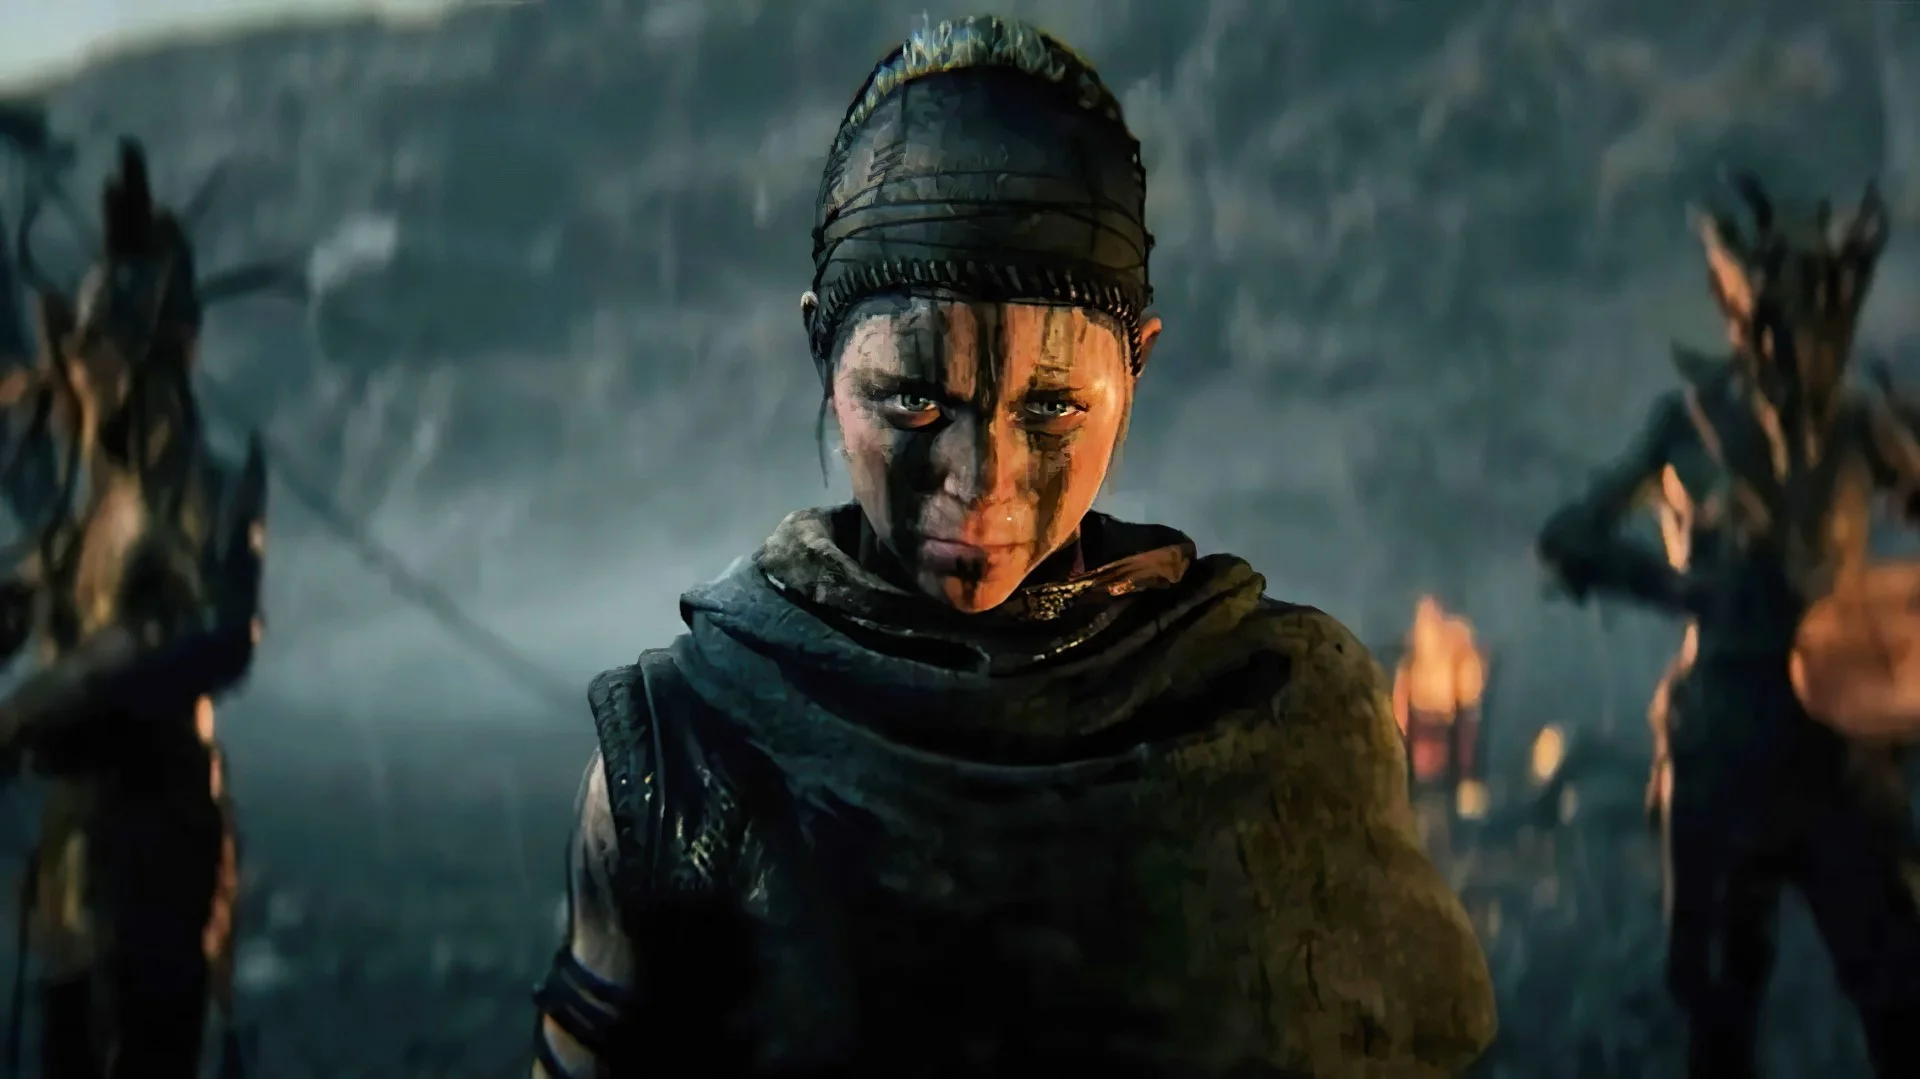 Hellblade 2 Set for 8-Hour Epic: Ninja Theory's AAA Title Hits Xbox in May